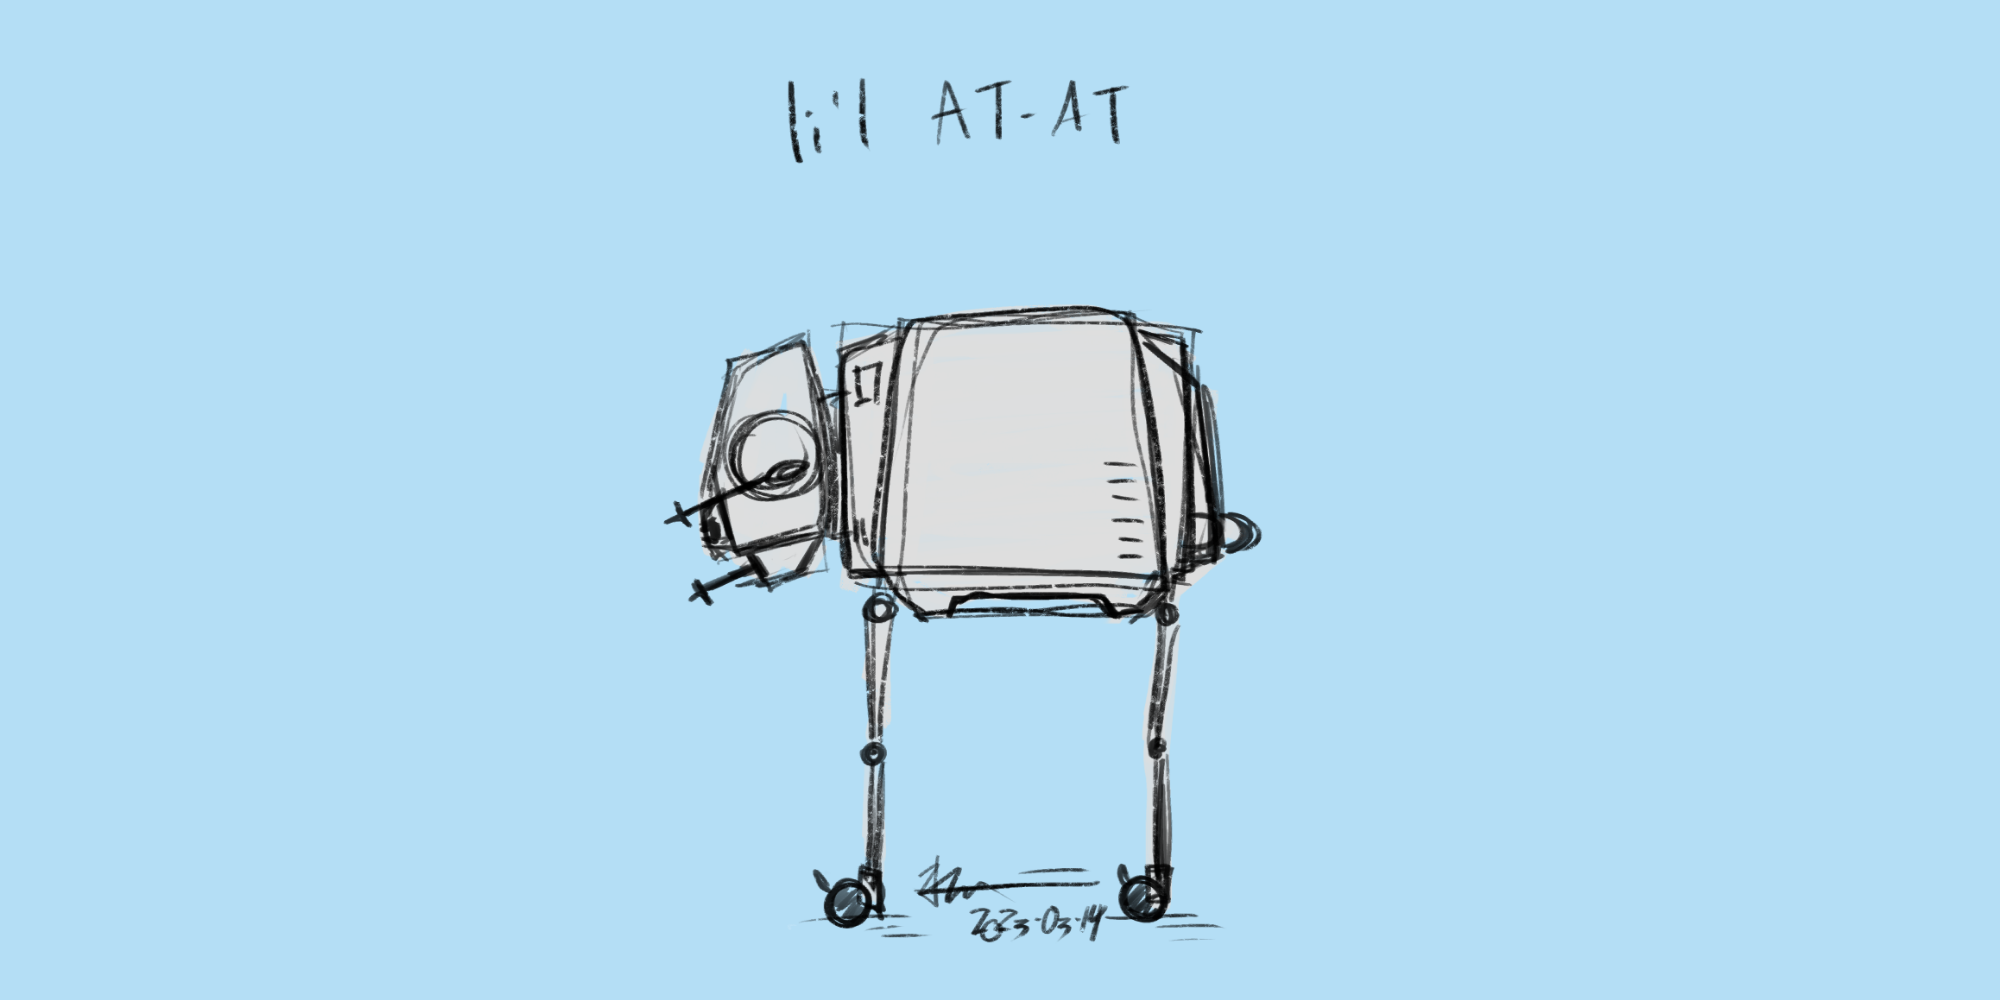 Rough sketched cartoon of a Star Wars AT-AT Walker, with a pudgy body atop spindly legs. In place of regular walker feet, are plastic rollers with locking mechanism you typically find on office furniture.